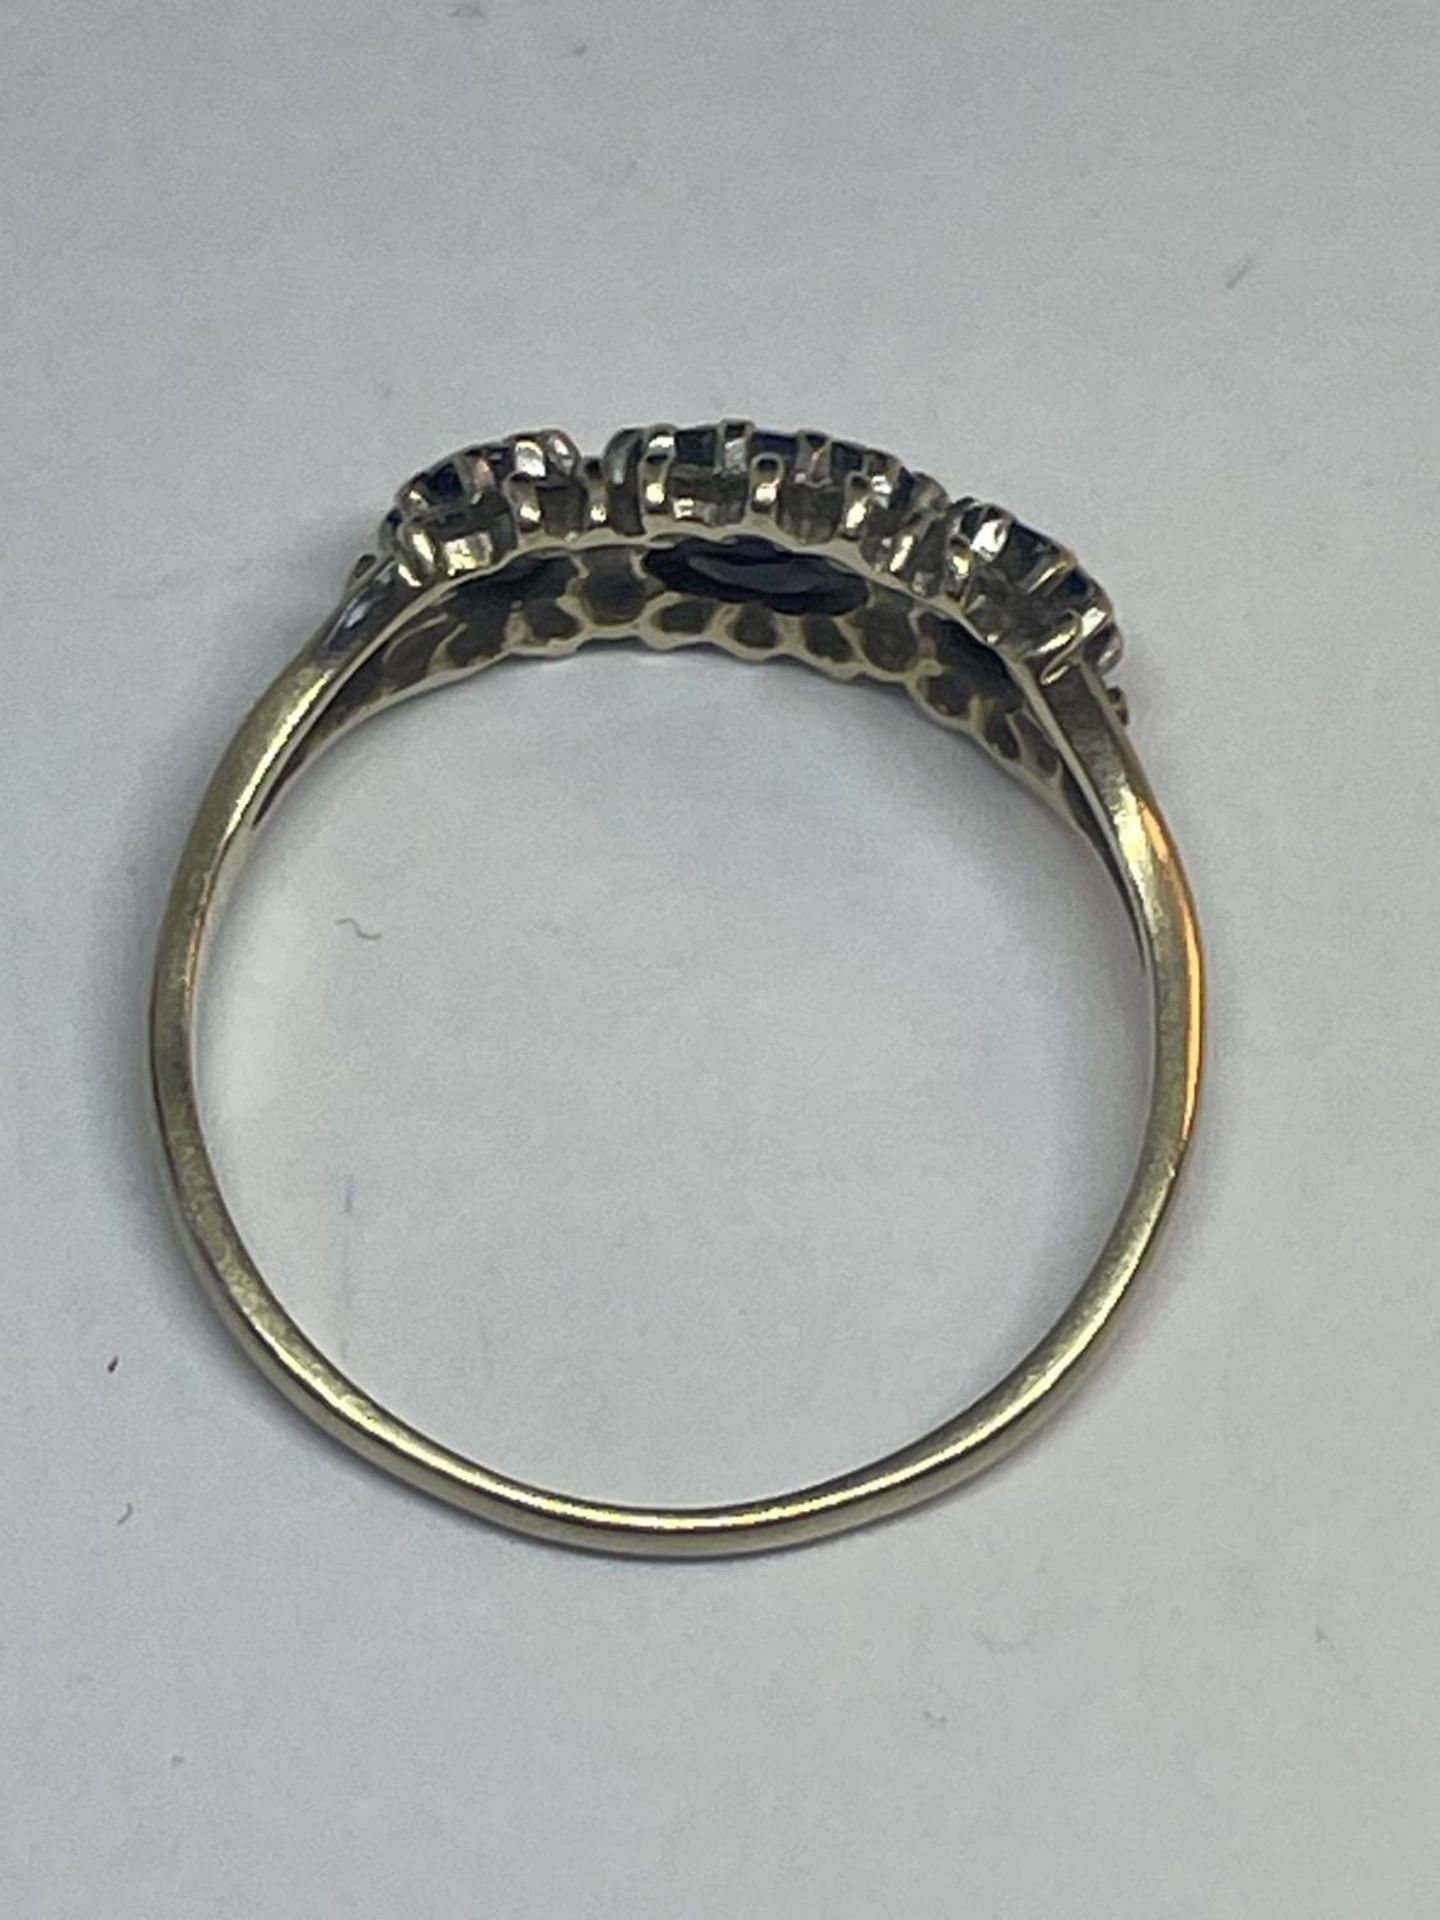 A 9 CARAT GOLD RING WITH THREE IN LINE SAPPHIRES SURROUNDED BY CUBIC ZIRCONIAS SIZE Q - Image 3 of 3